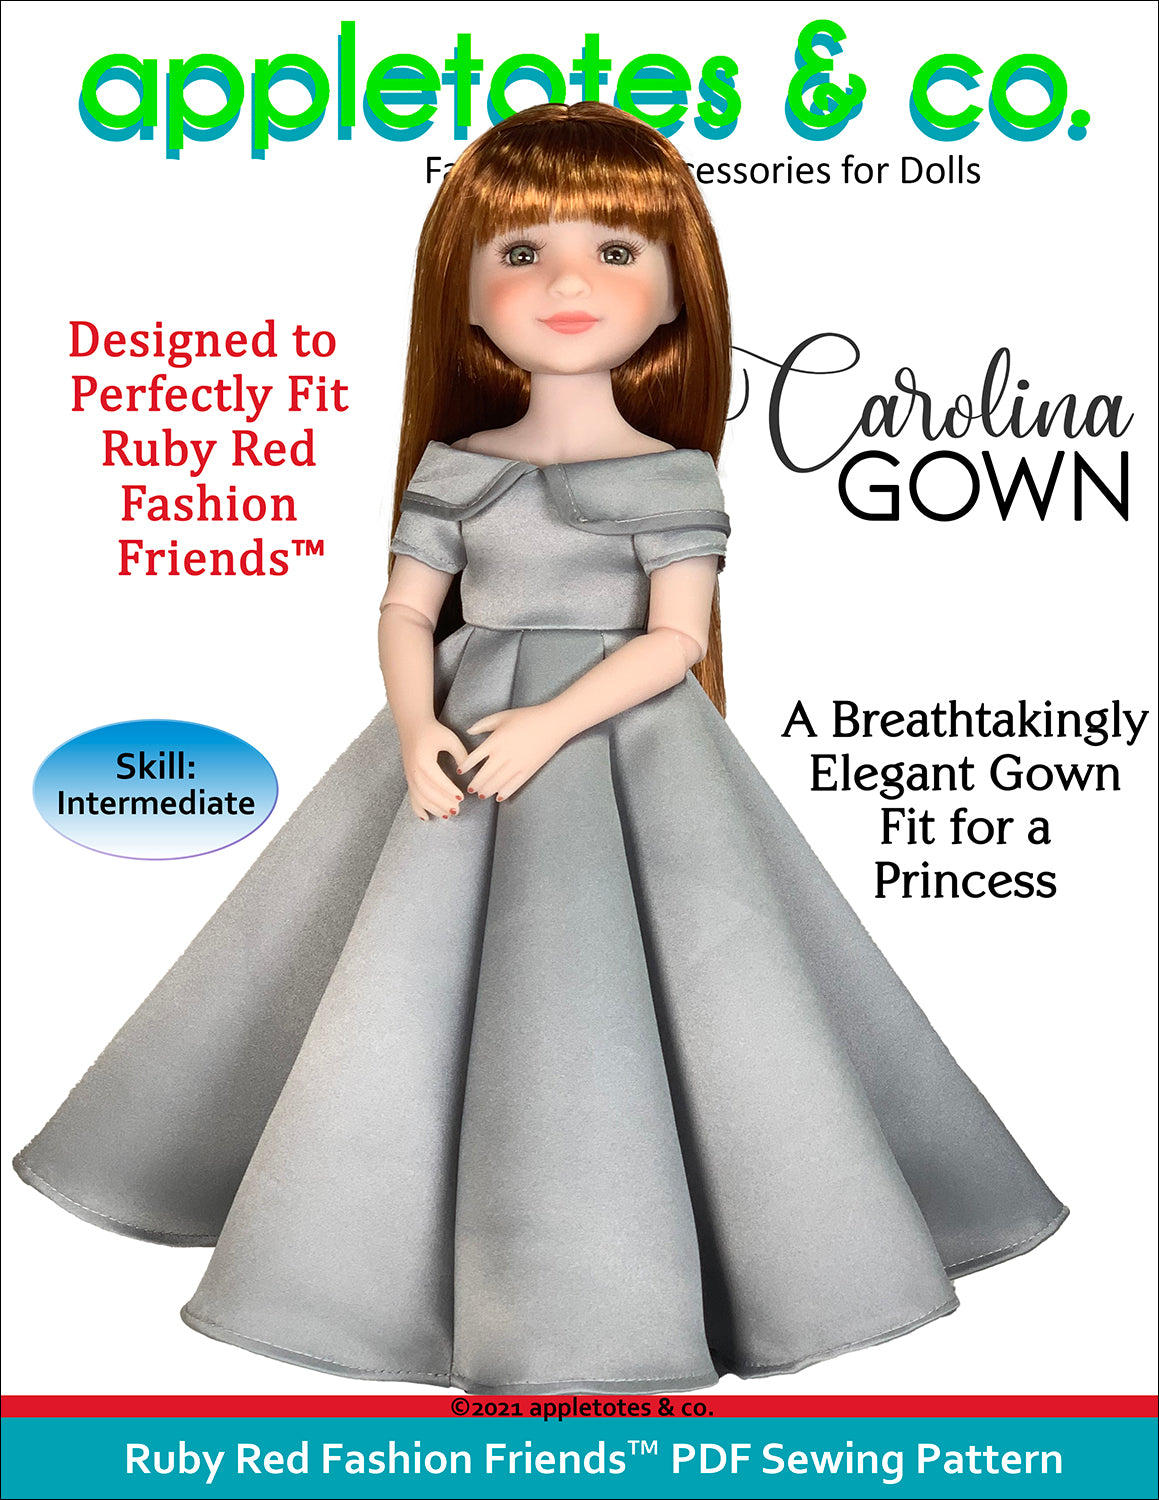 Carolina Gown Ruby Red Fashion Friends™ Sewing Pattern